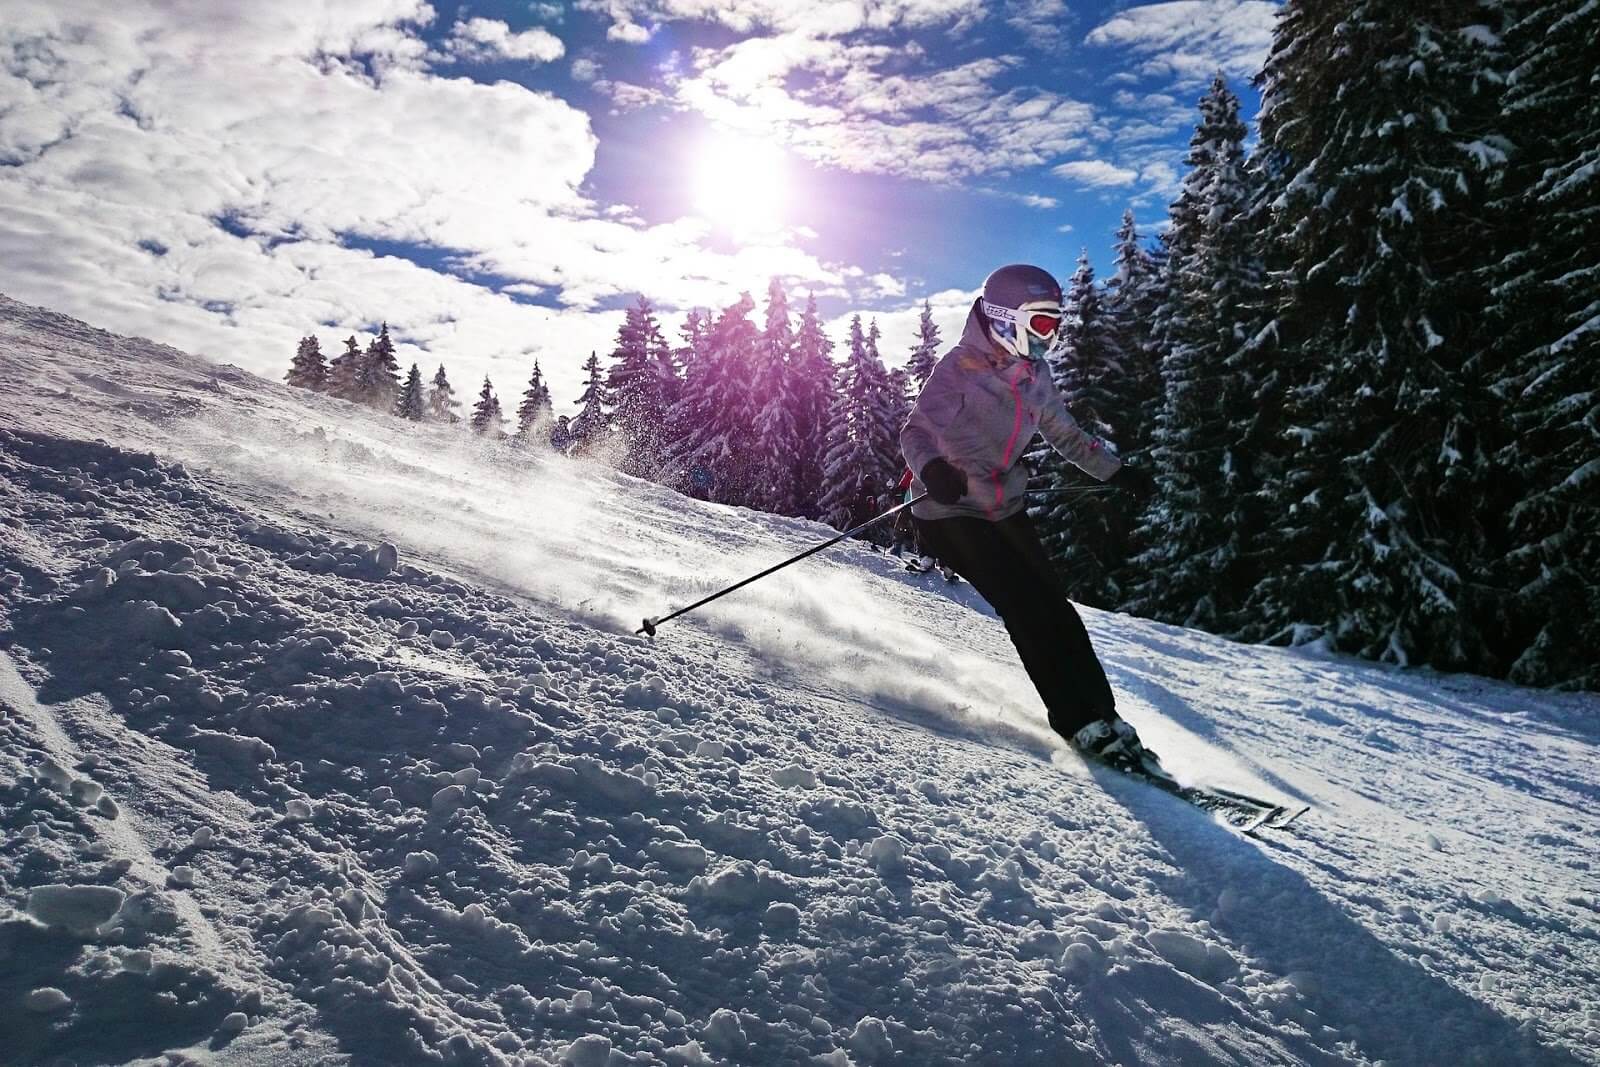 Jobs That Allow You To Travel: Ski Instructor